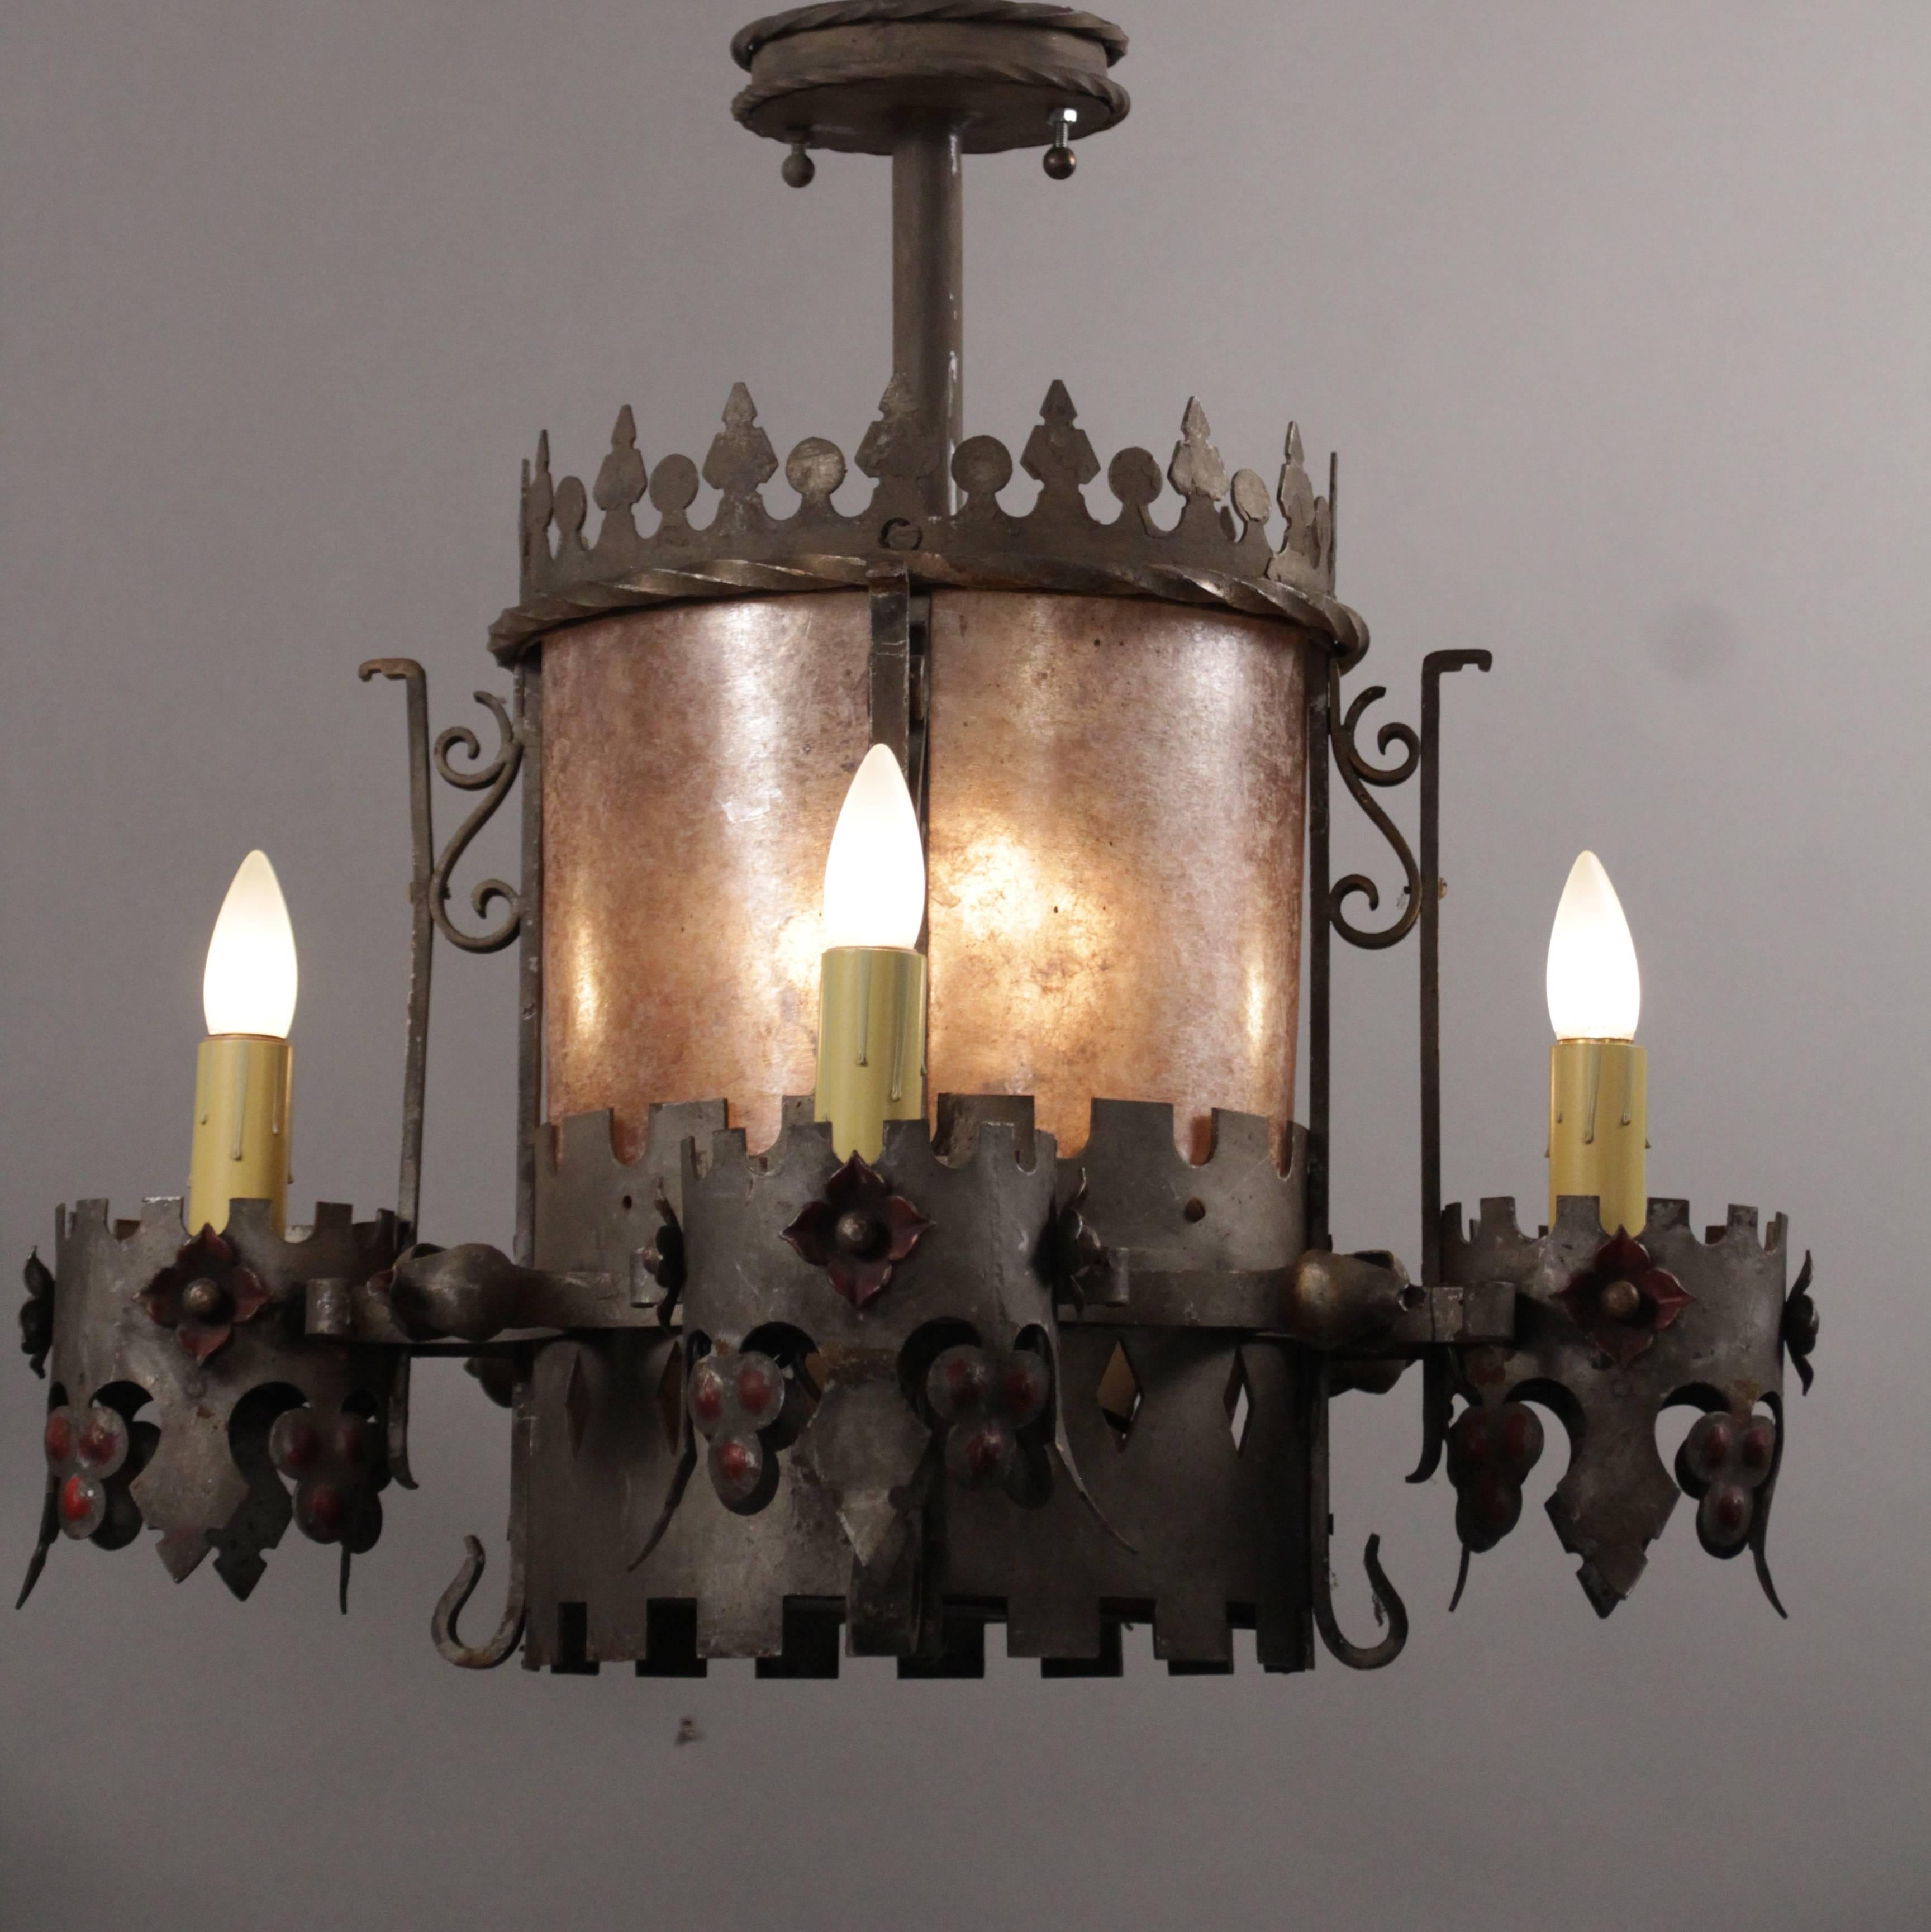 Chandelier with original polychrome finish and new almond mica, circa 1920s. Possibly from a theater, would fit nicely in English Tudor, Spanish Revival and Storybook architecture. Measure: 23.25